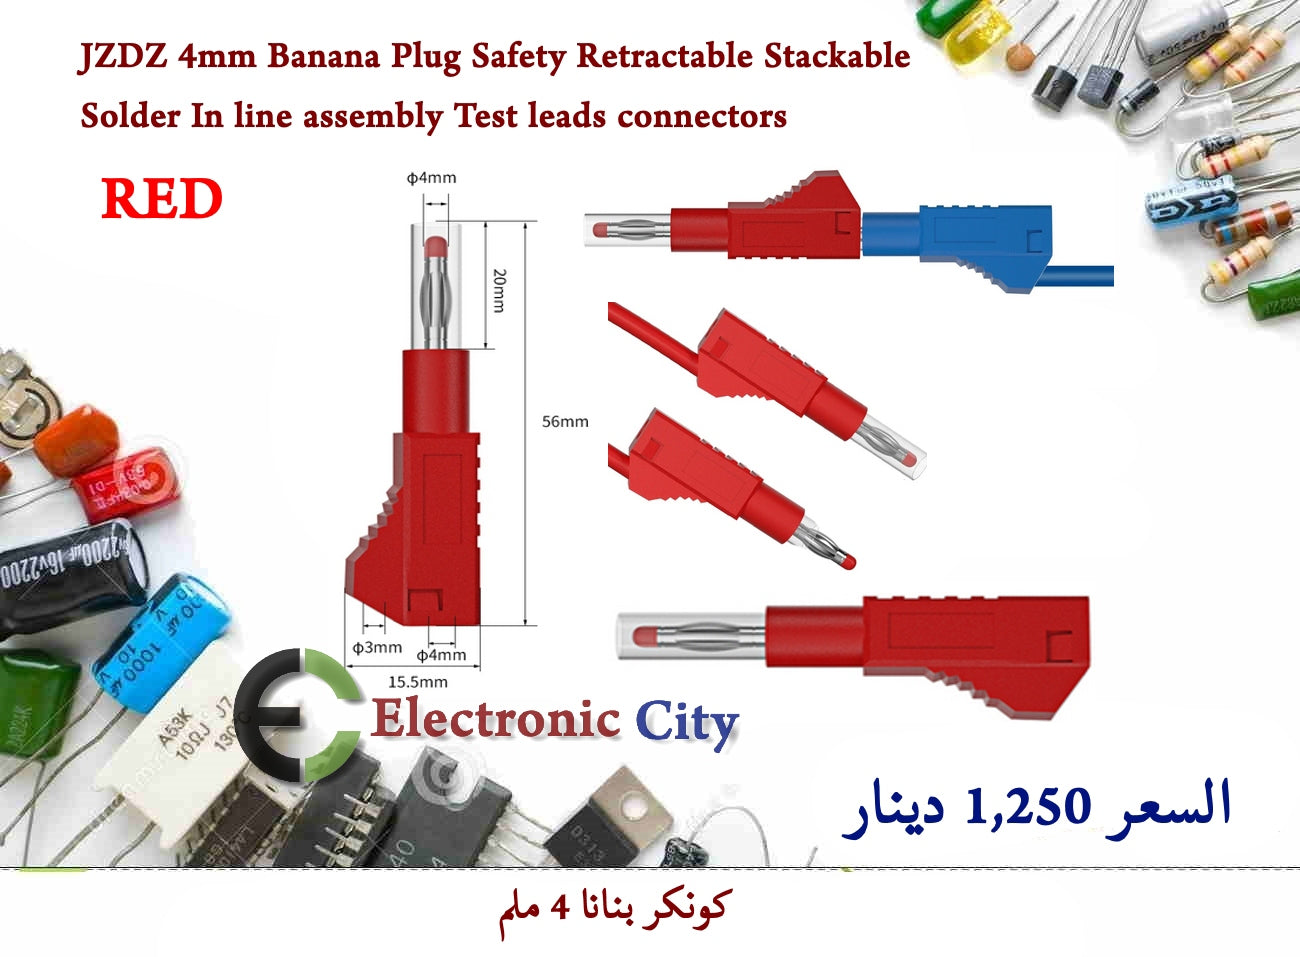 JZDZ 4mm Banana Plug Safety Retractable Stackable Solder In line assembly Test leads connectors Red